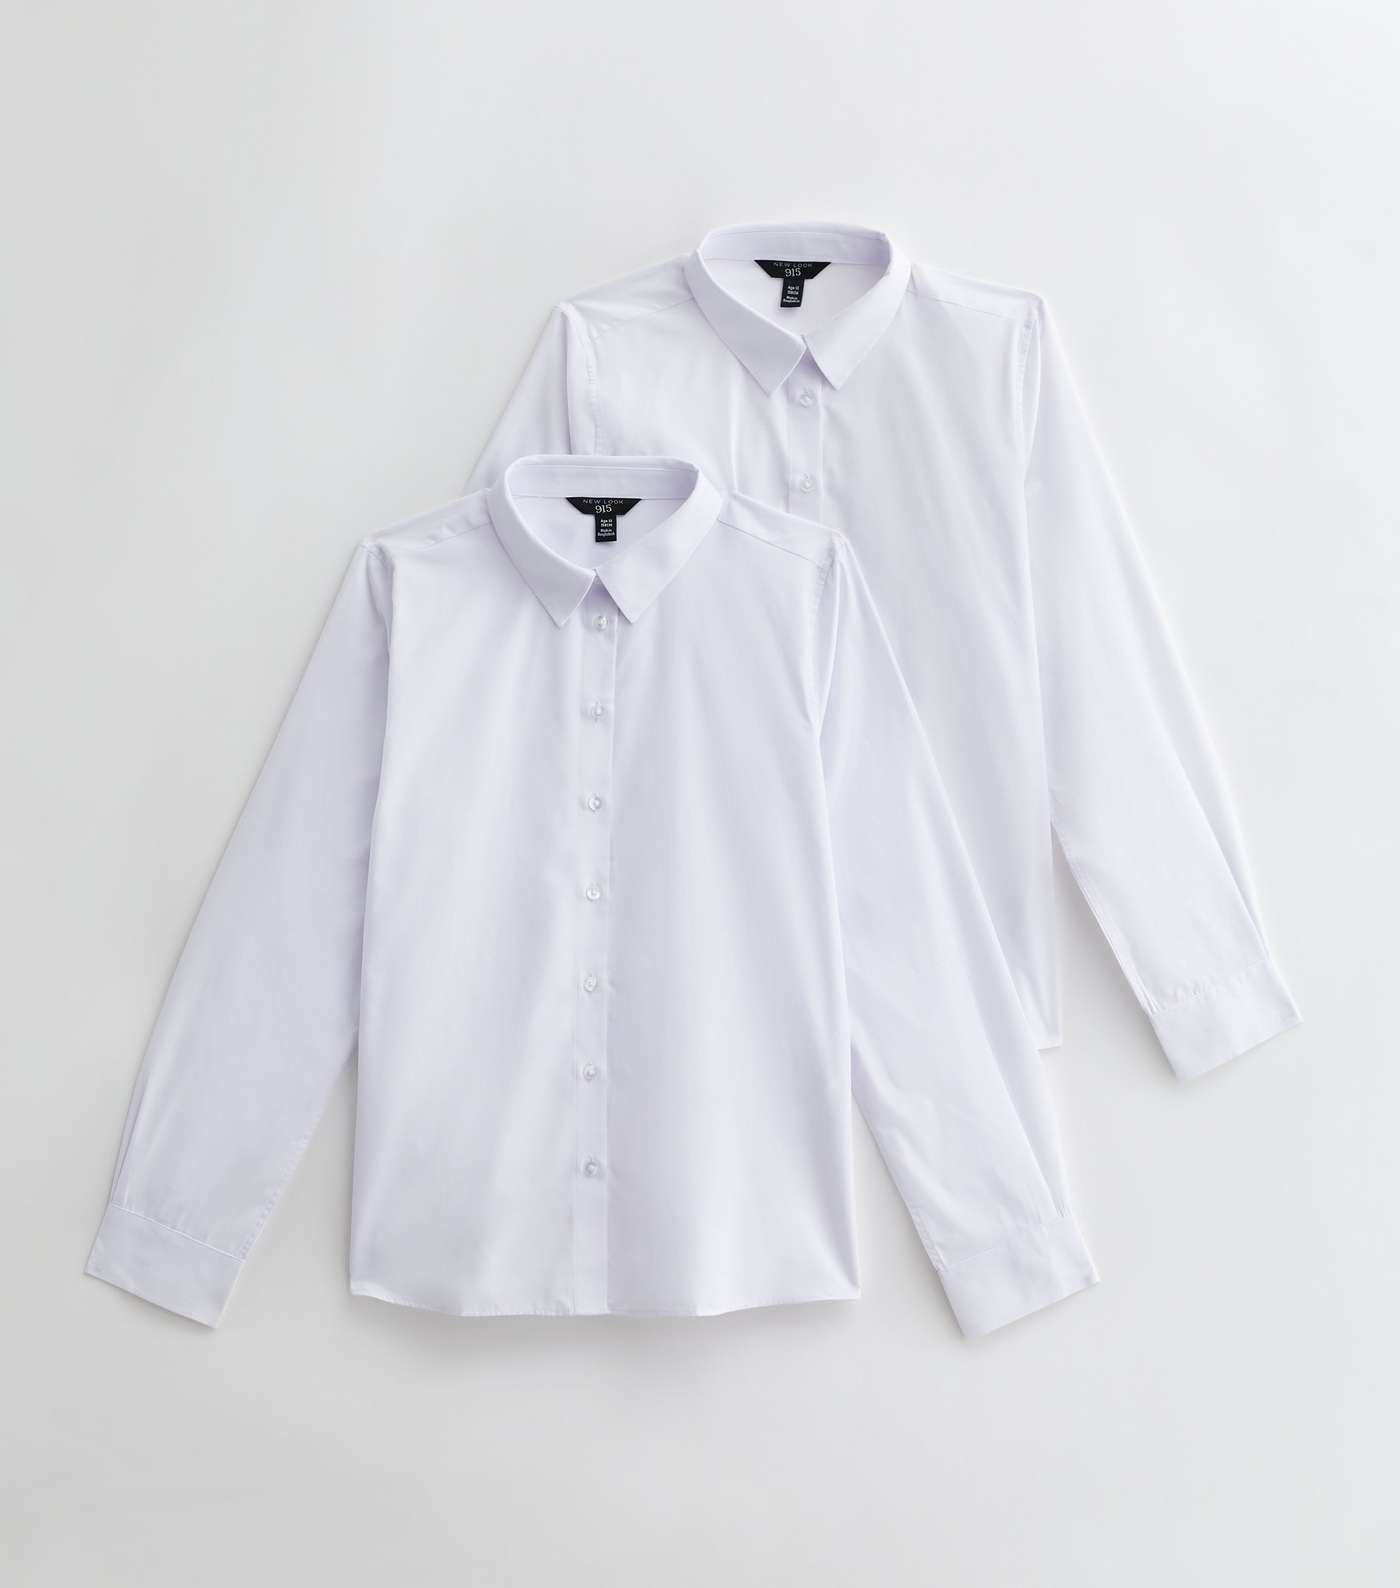 Girls 2 Pack White Long Sleeve Relaxed Fit School Shirts Image 5